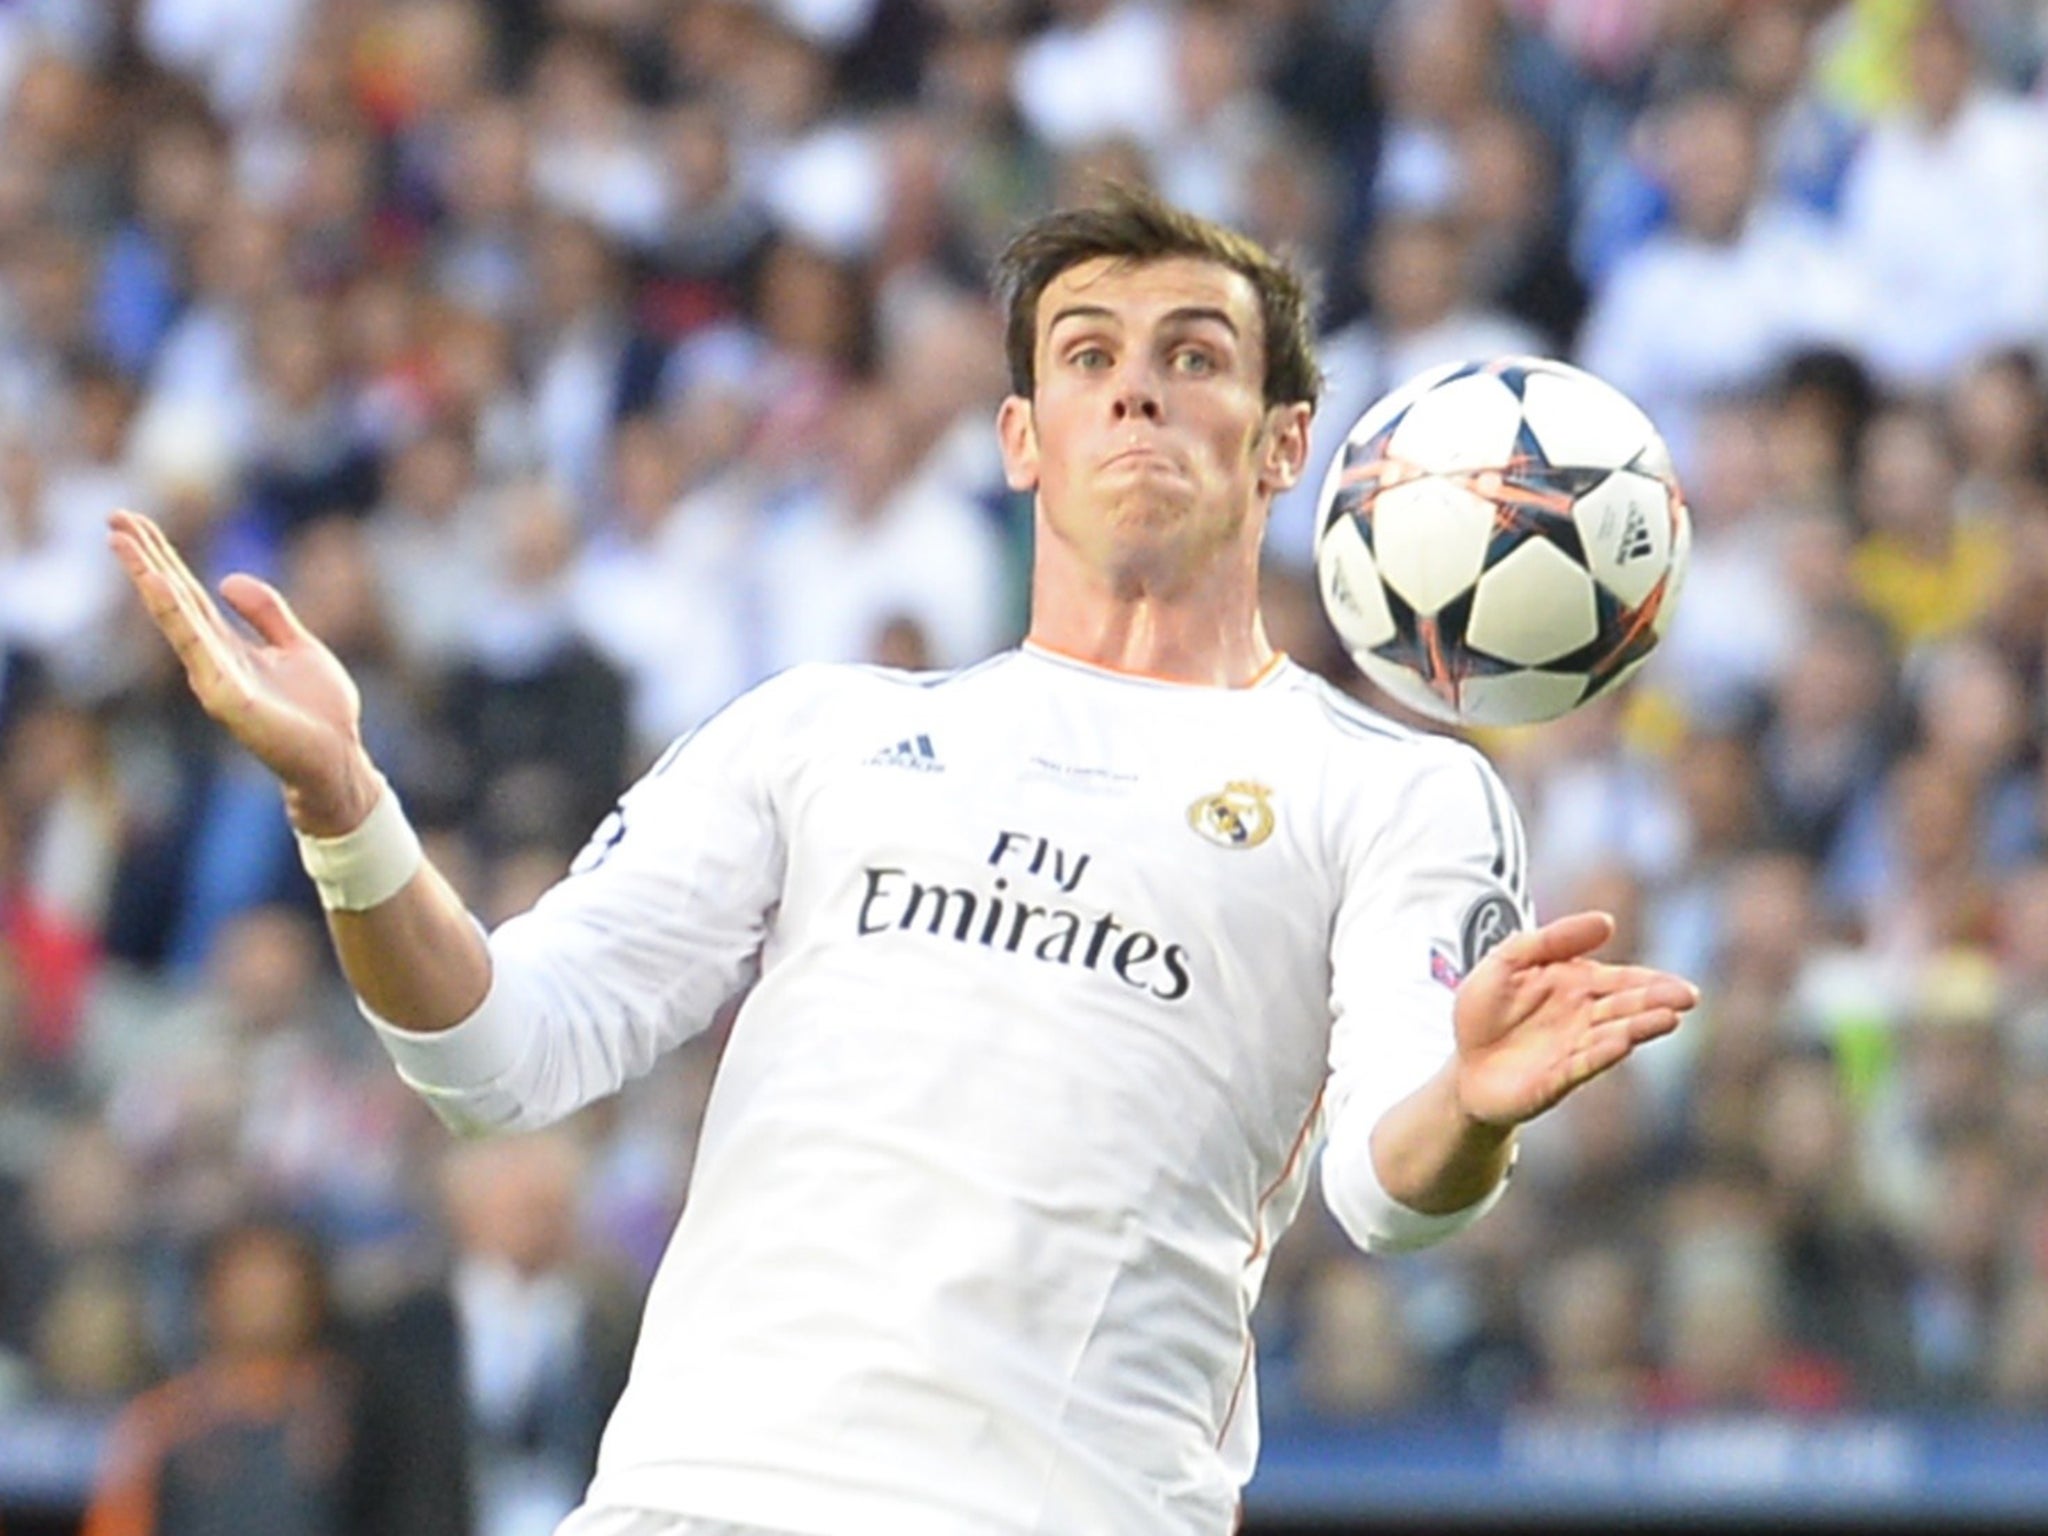 Gareth Bale tries to control the ball in the Champions League final